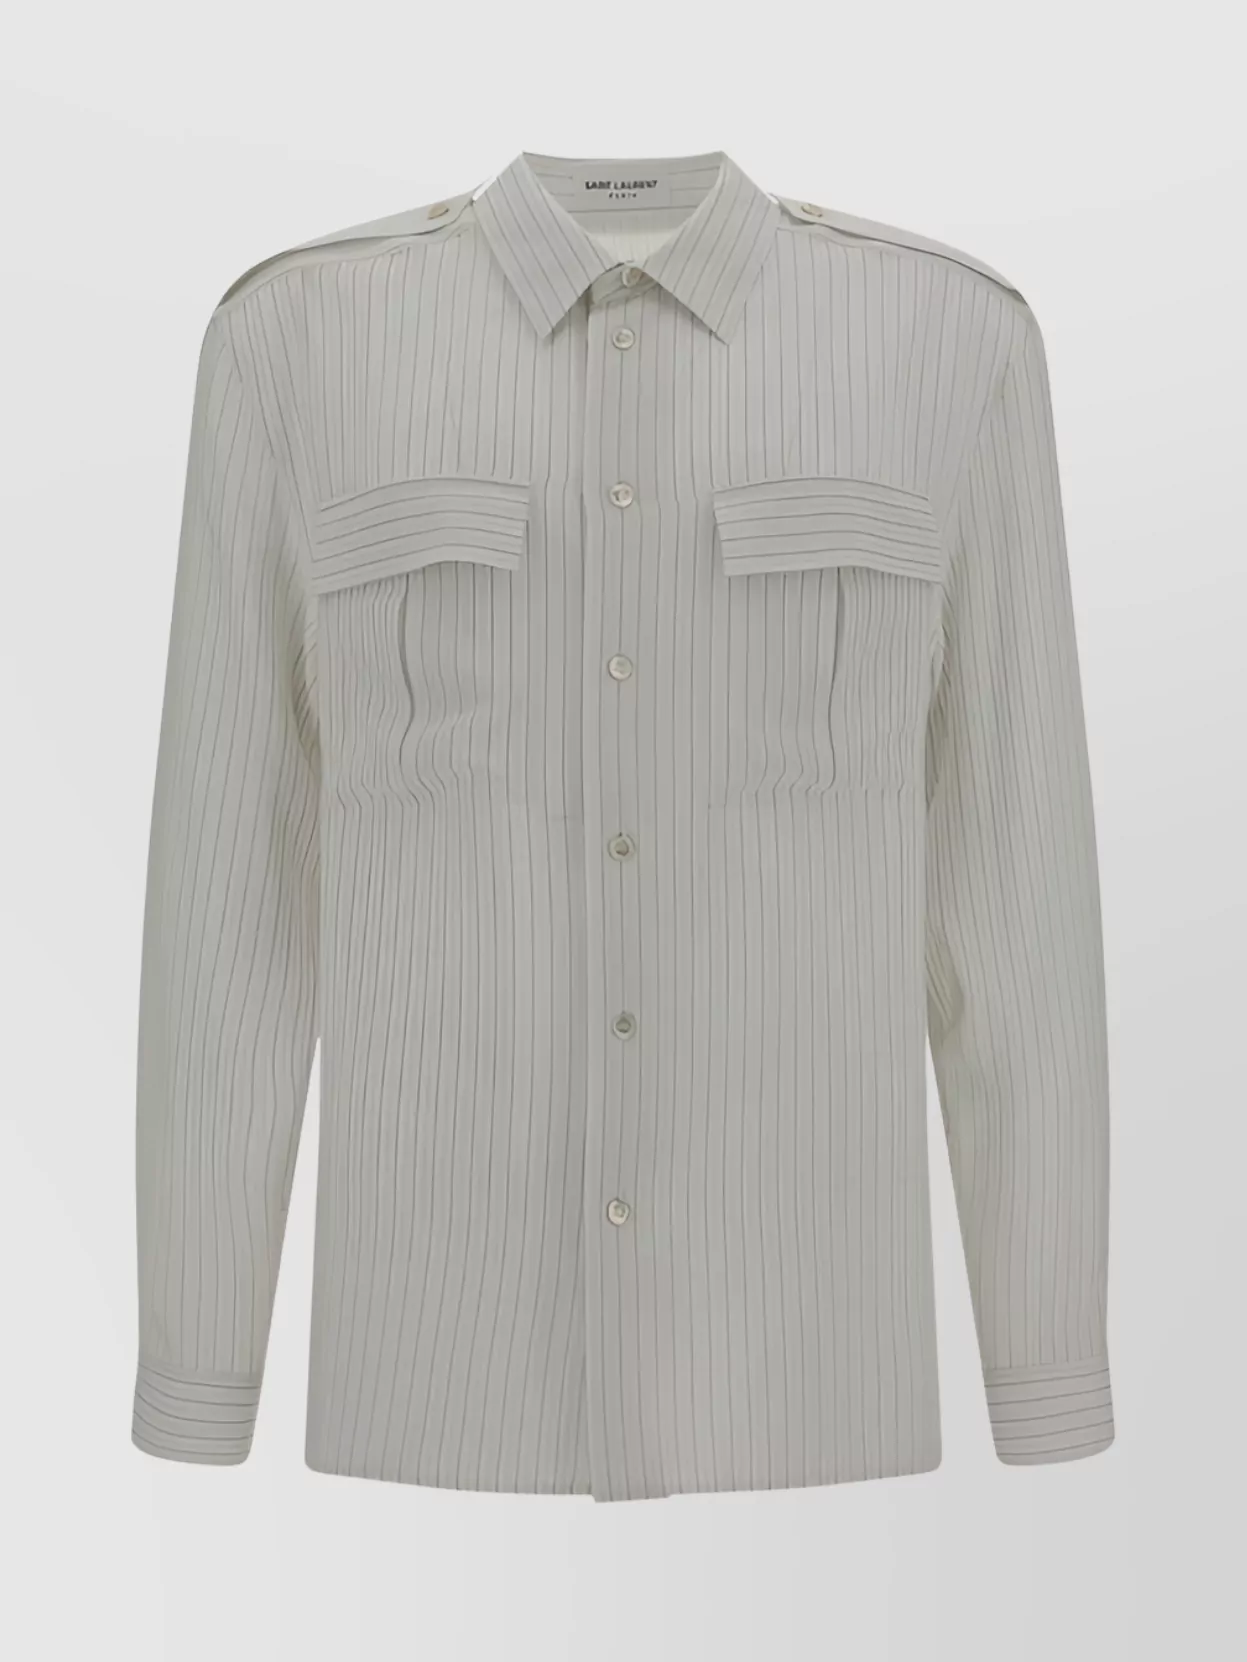 Saint Laurent Striped Shirt With Point Collar And Pleated Back In Gray